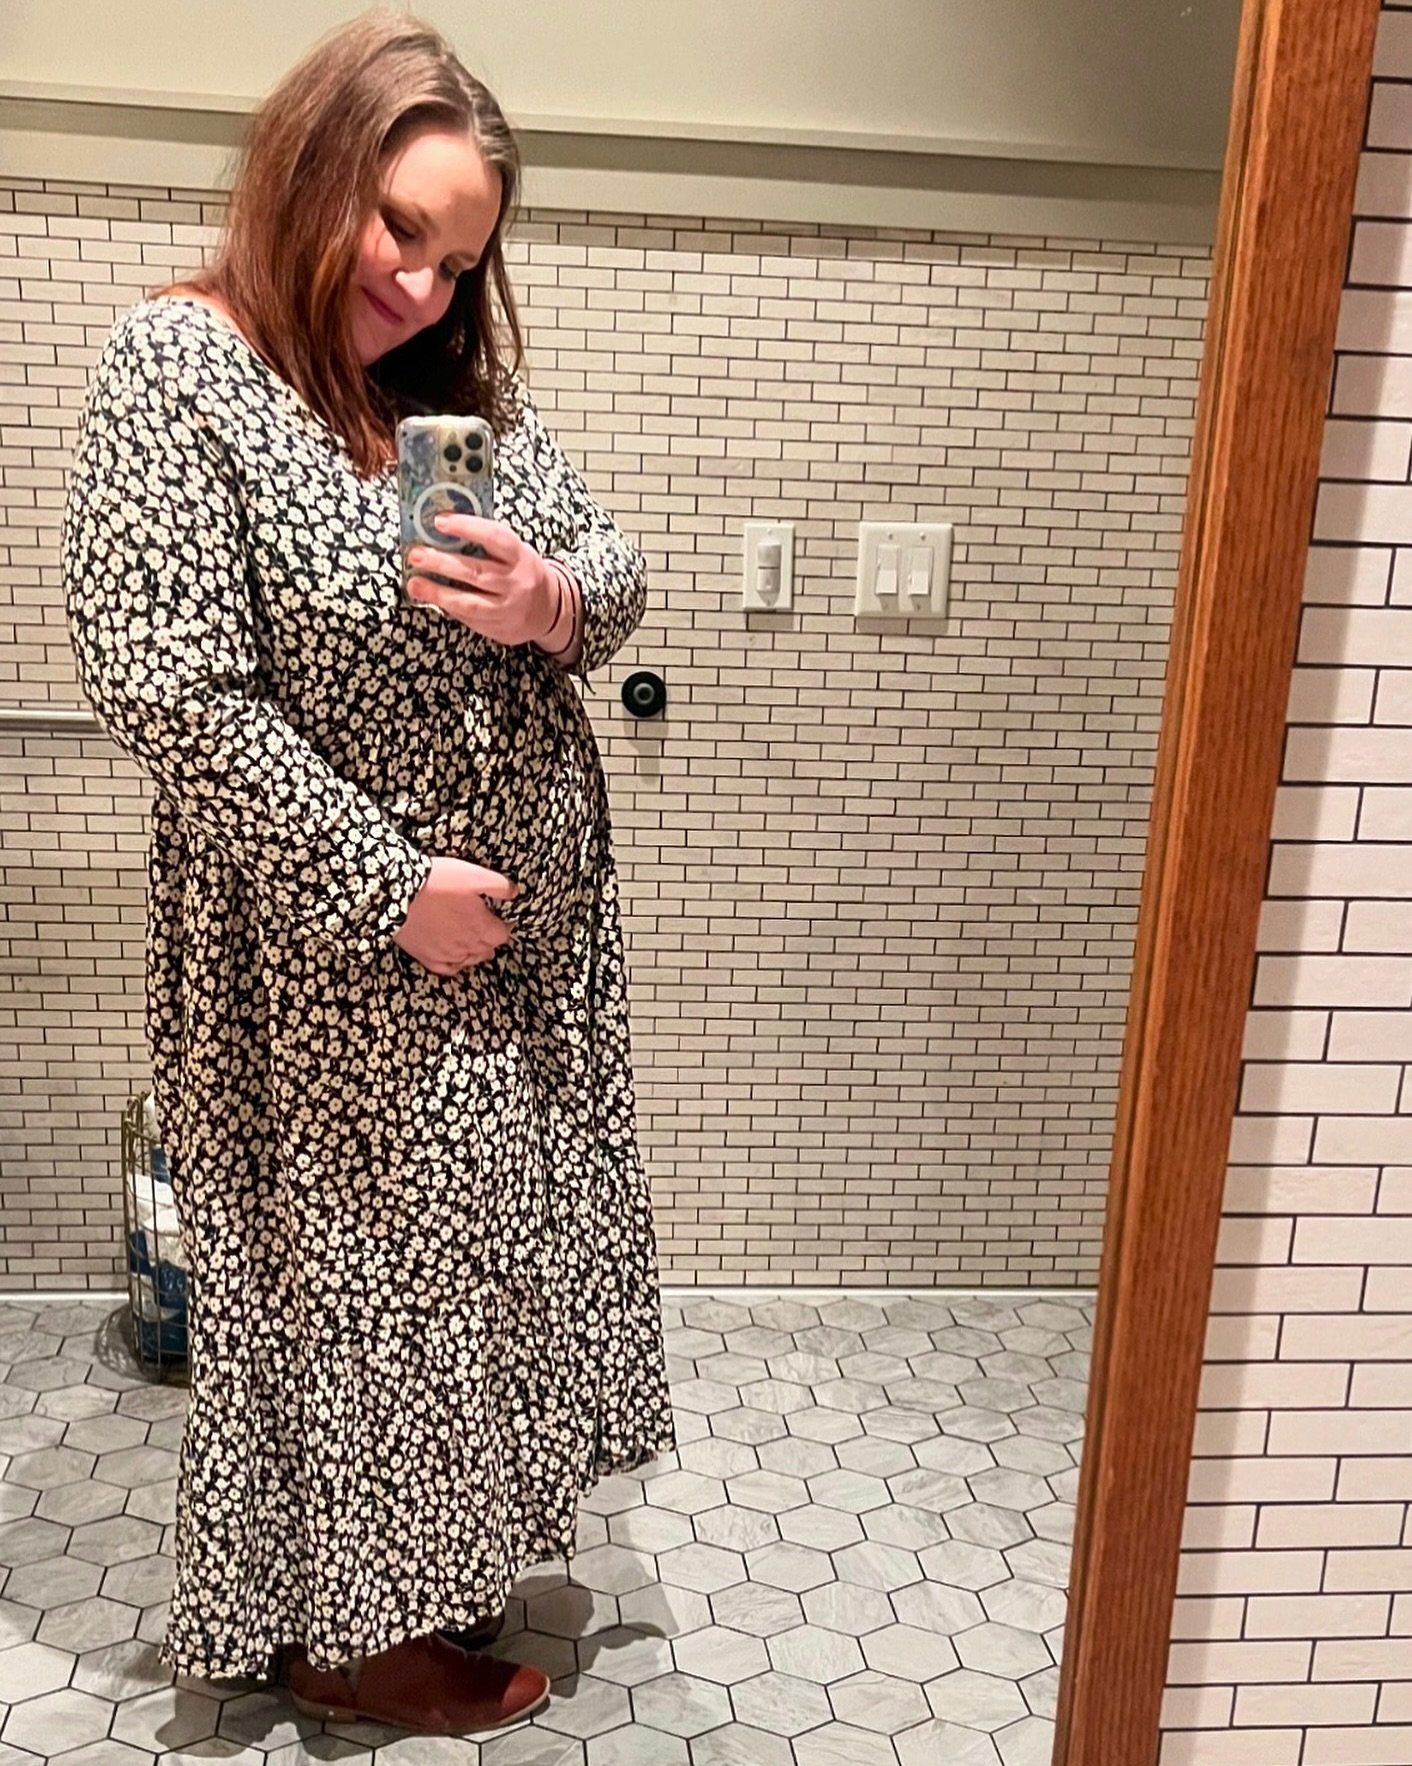 Happy Friday, from me (Courtney) and the baby in my belly!
.
.
A few housekeeping announcements: 
.
- Third trimester is here which means my maternity leave is rapidly getting closer! 
.
- what does that mean for business at Raleigh Cheesy? Absolutel